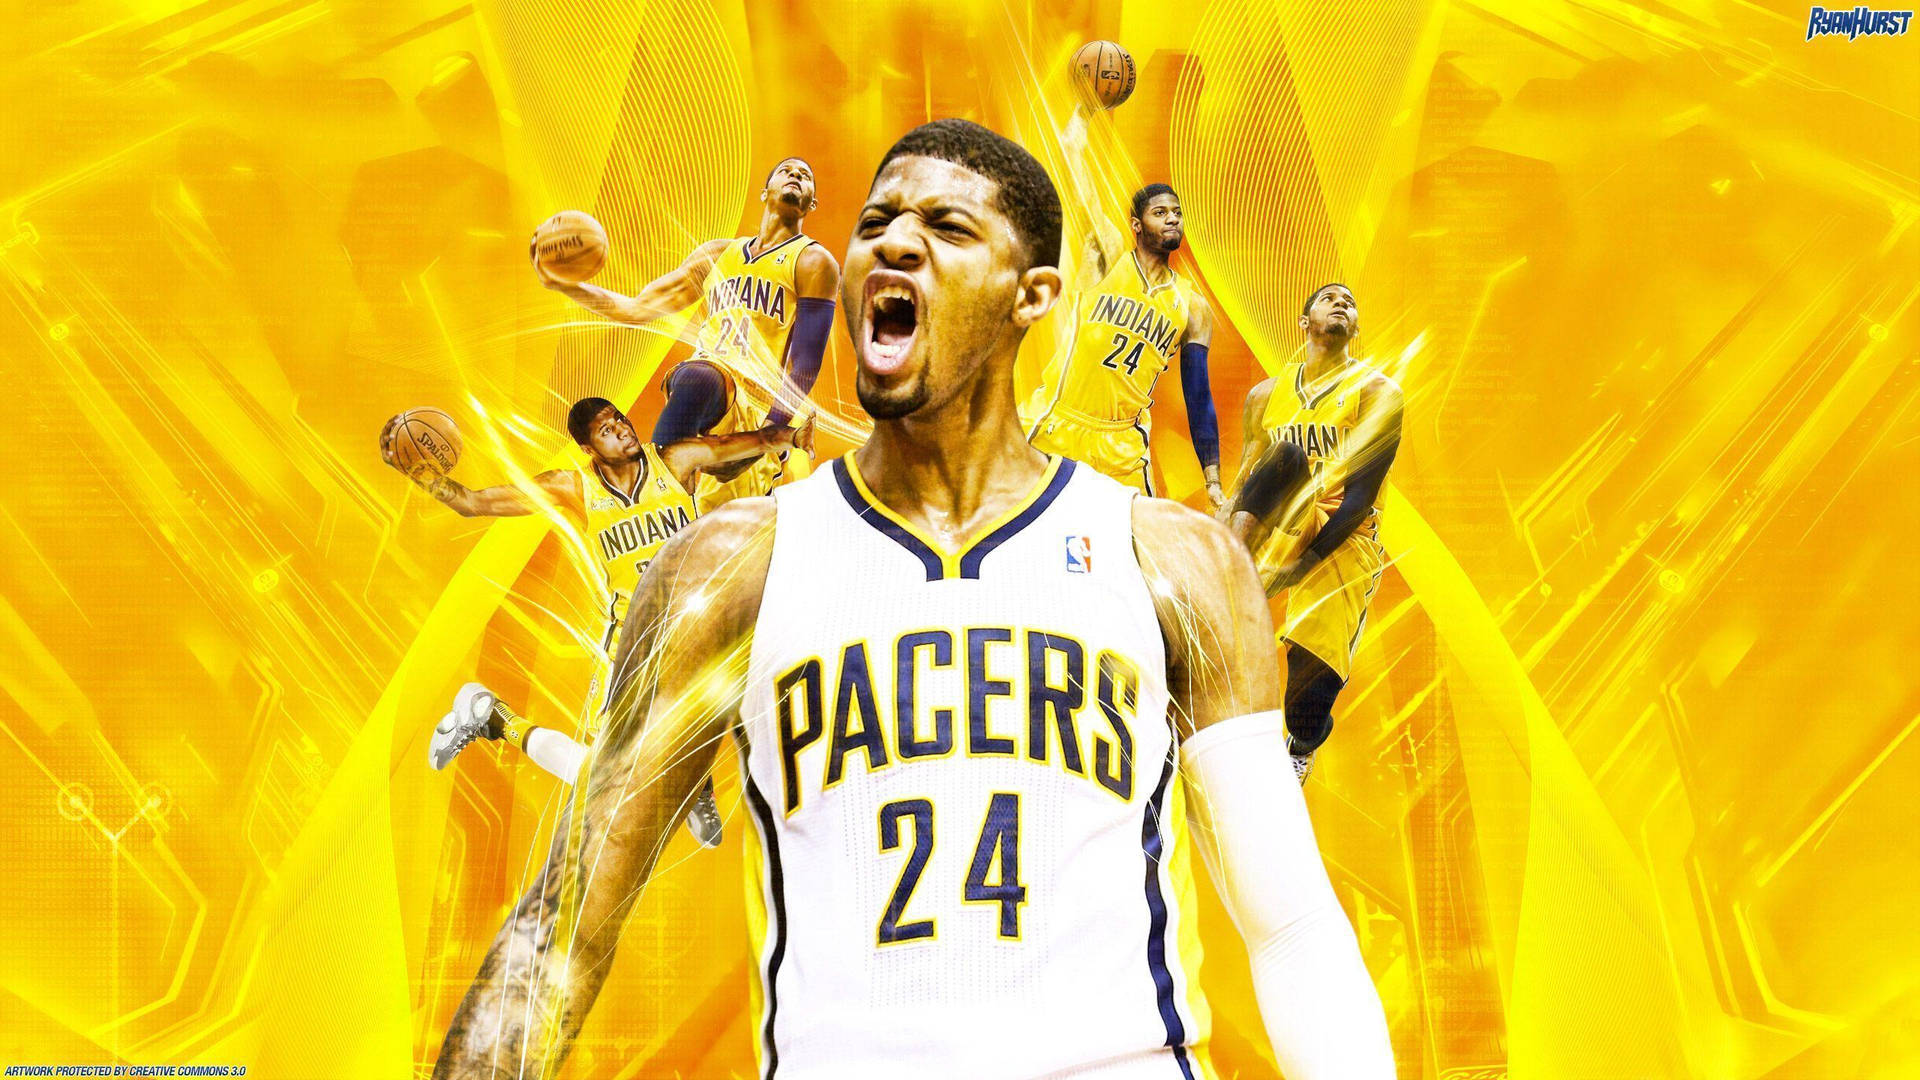 paul george pacers 24 jersey